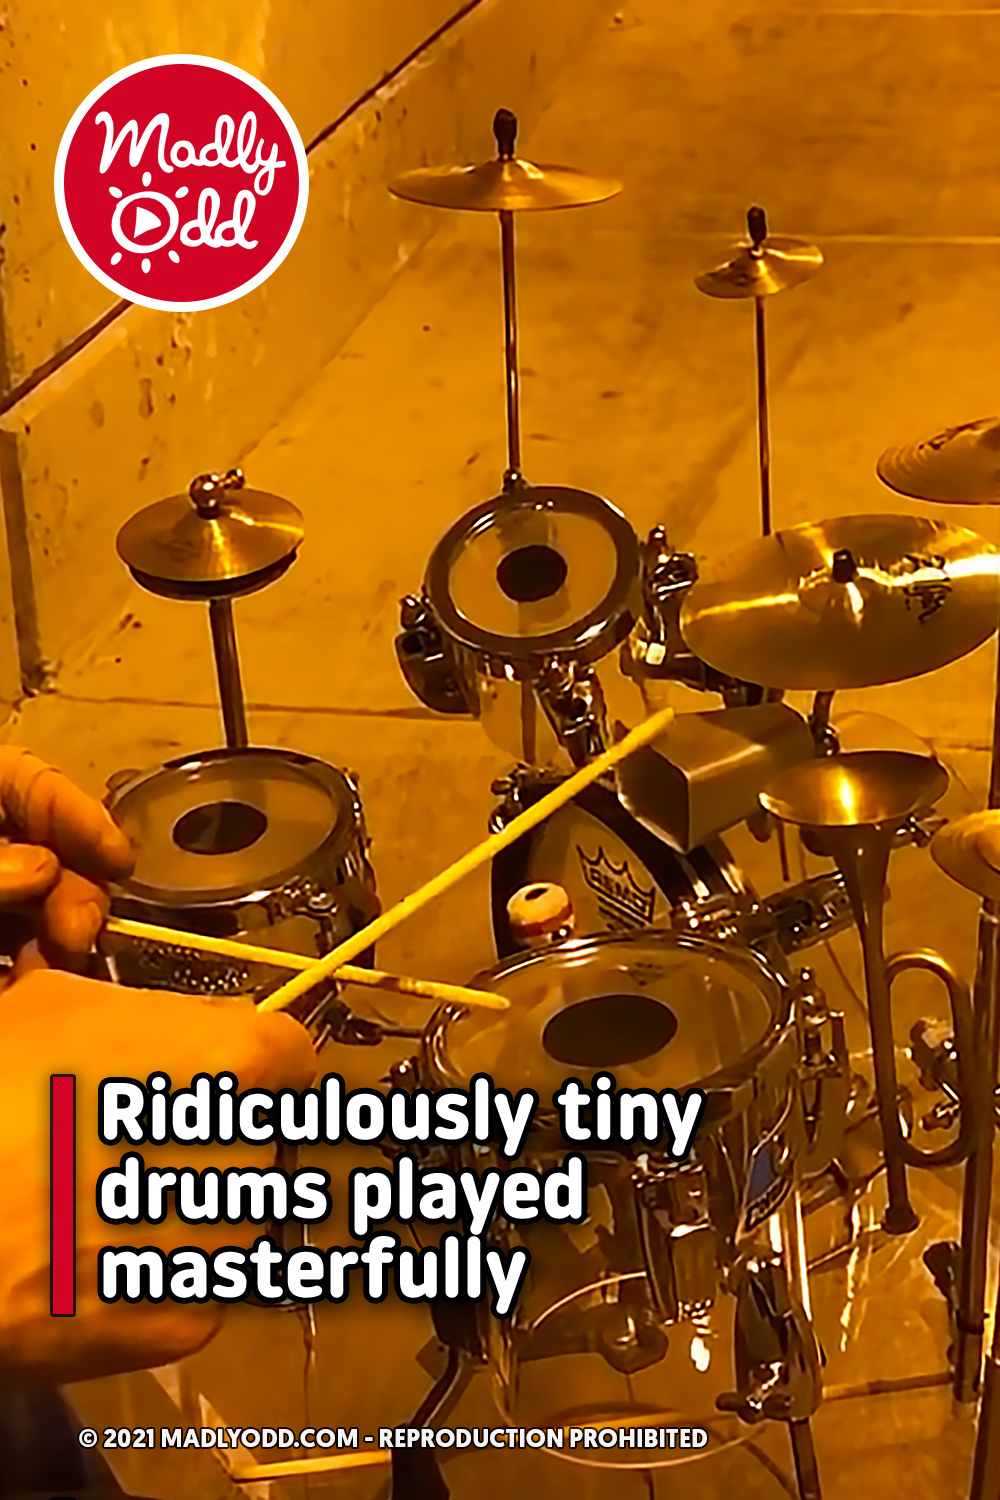 Ridiculously tiny drums played masterfully